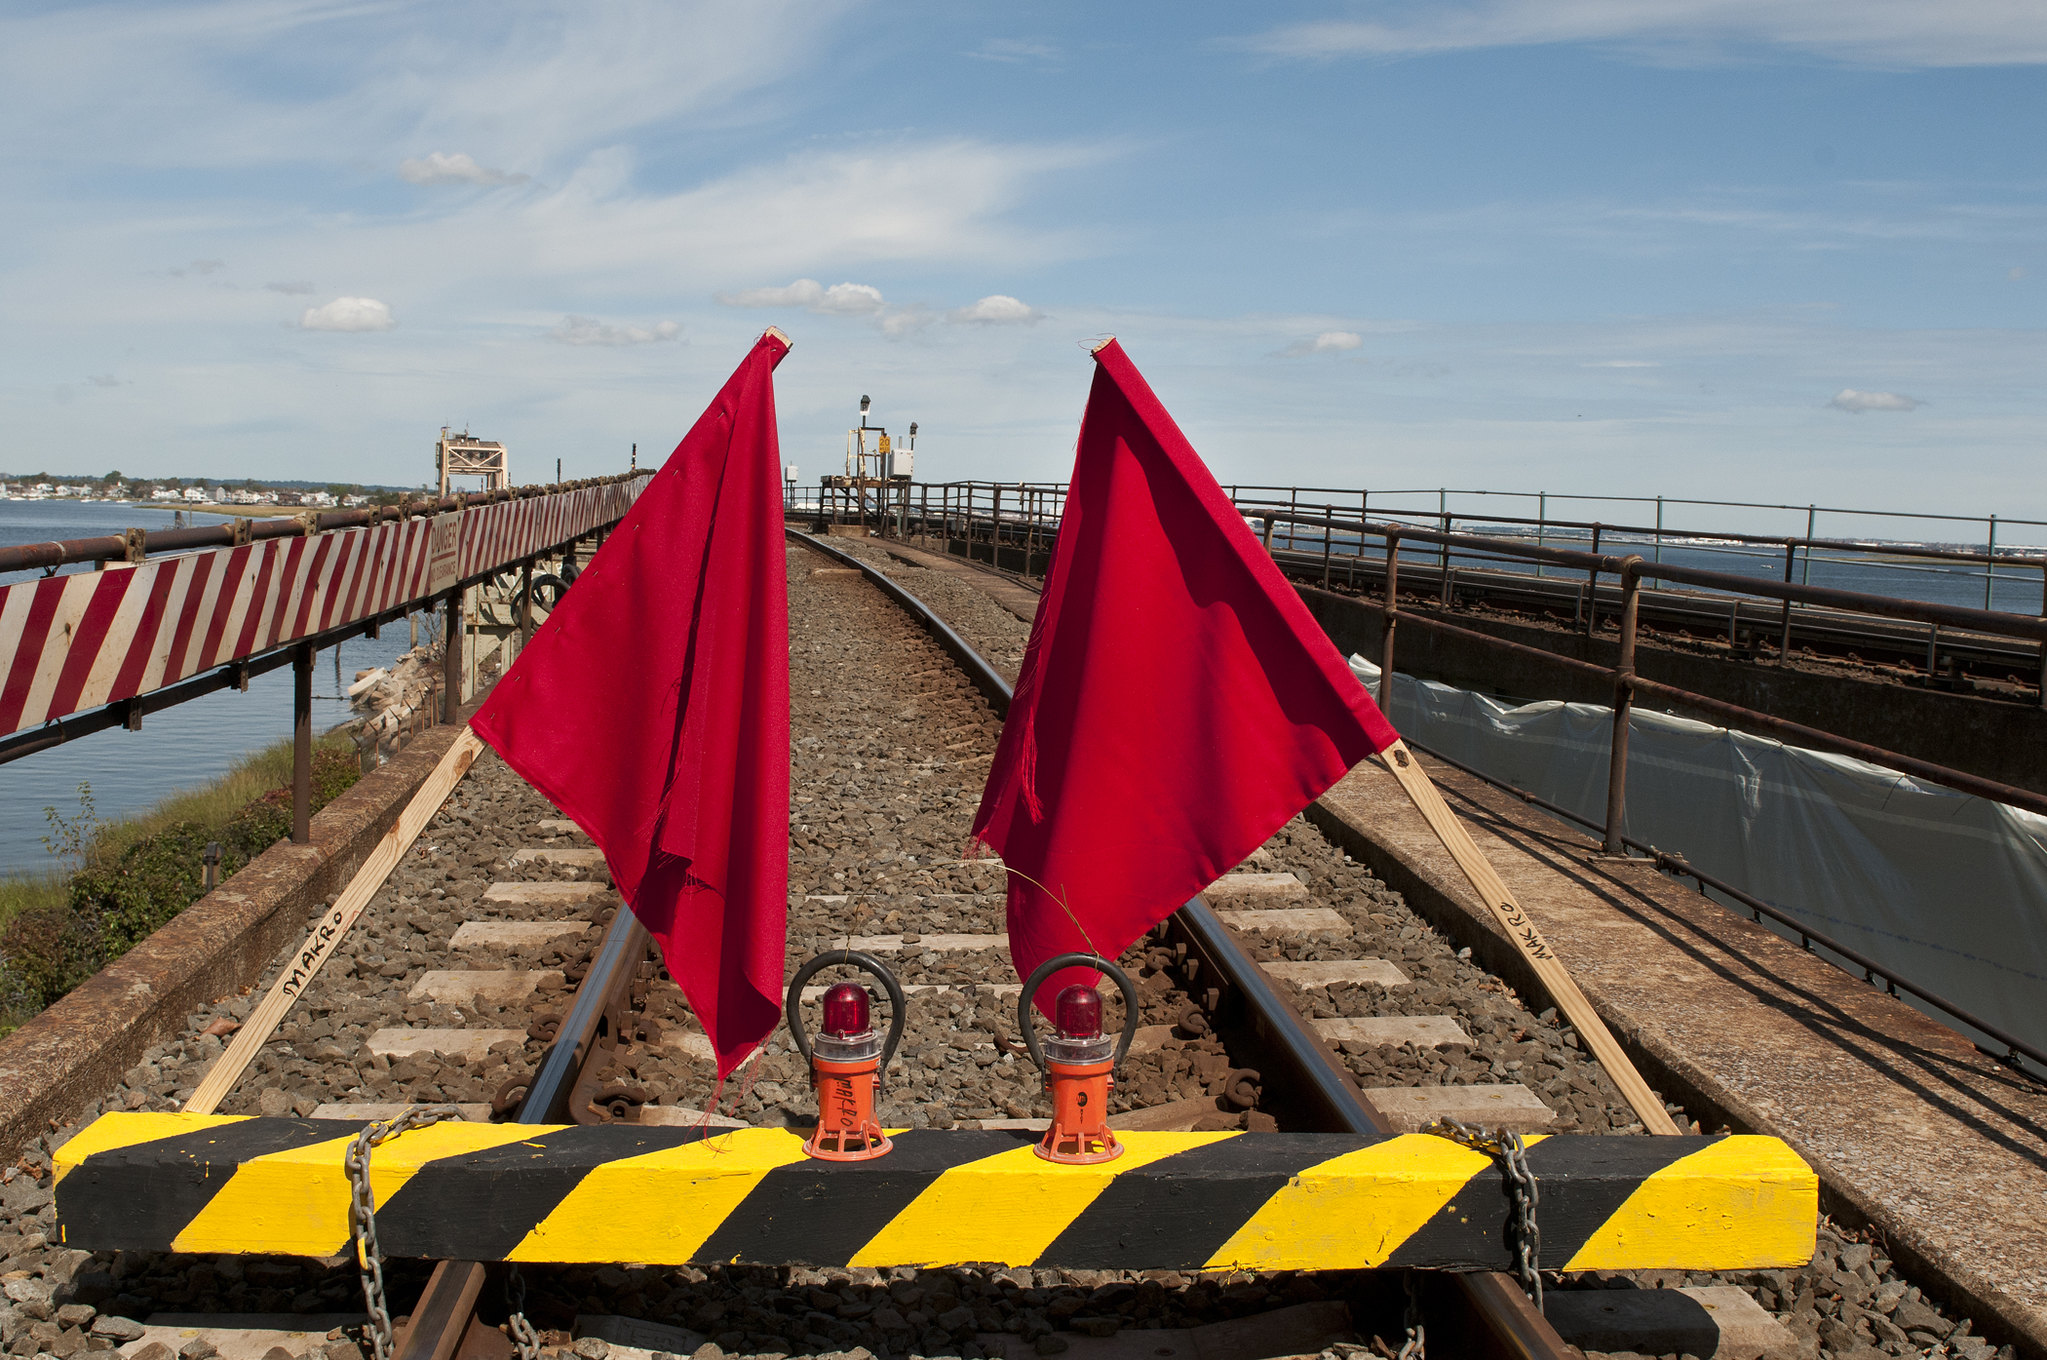 The image shows a railroad track blocked by a barrier with red flags and warning lights, set against a background of blue sky and distant buildings, indicating construction or maintenance.